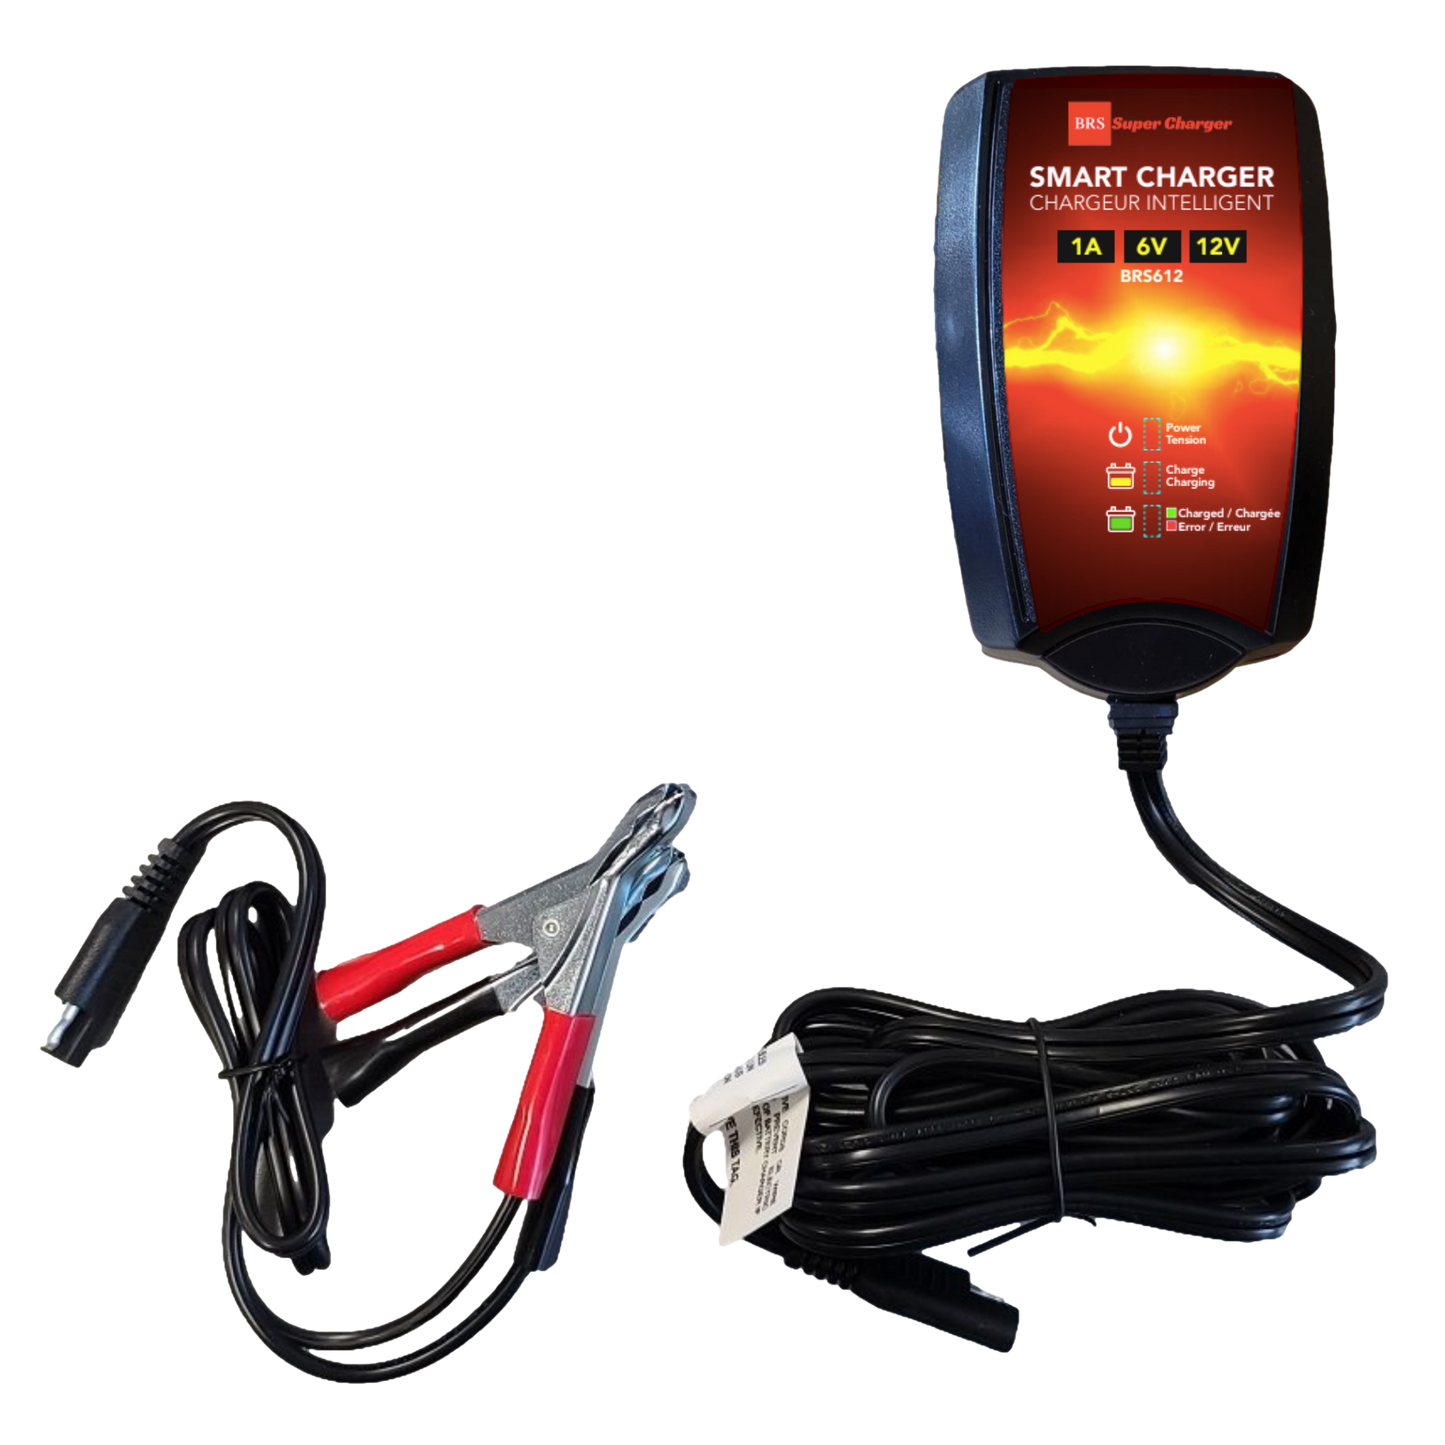 High Performance BRS14AH-BS 2 Year Battery & Smart Charger / Maintainer Combo Bundle Kit 12v Sealed AGM PowerSports Battery - BRS Super Battery